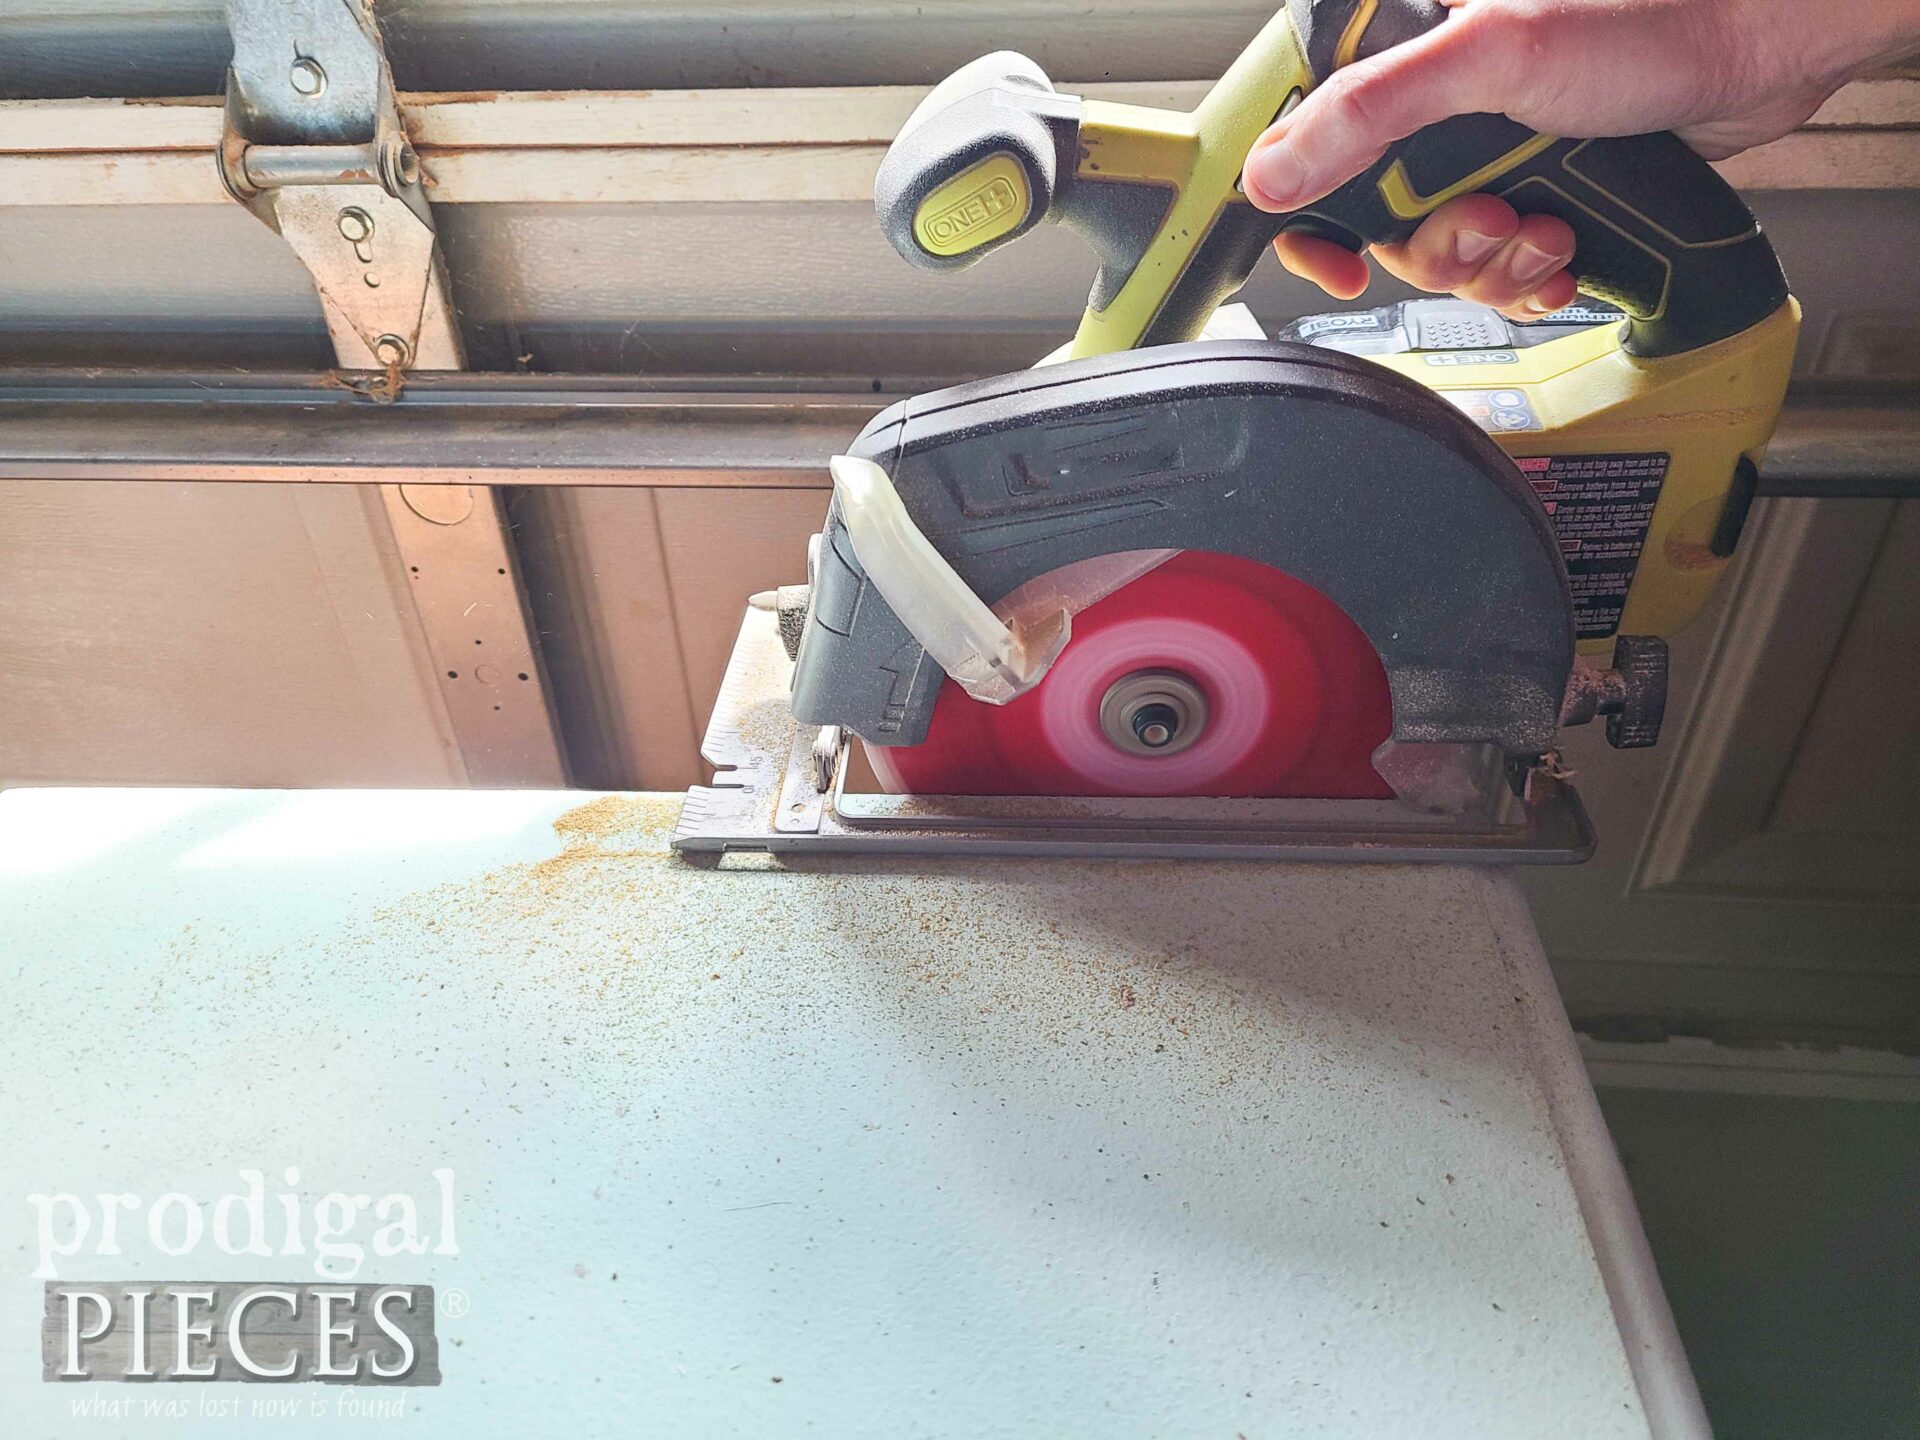 Cutting Sewing Machine Table Top with Saw | prodigalpieces.com #prodigalpieces